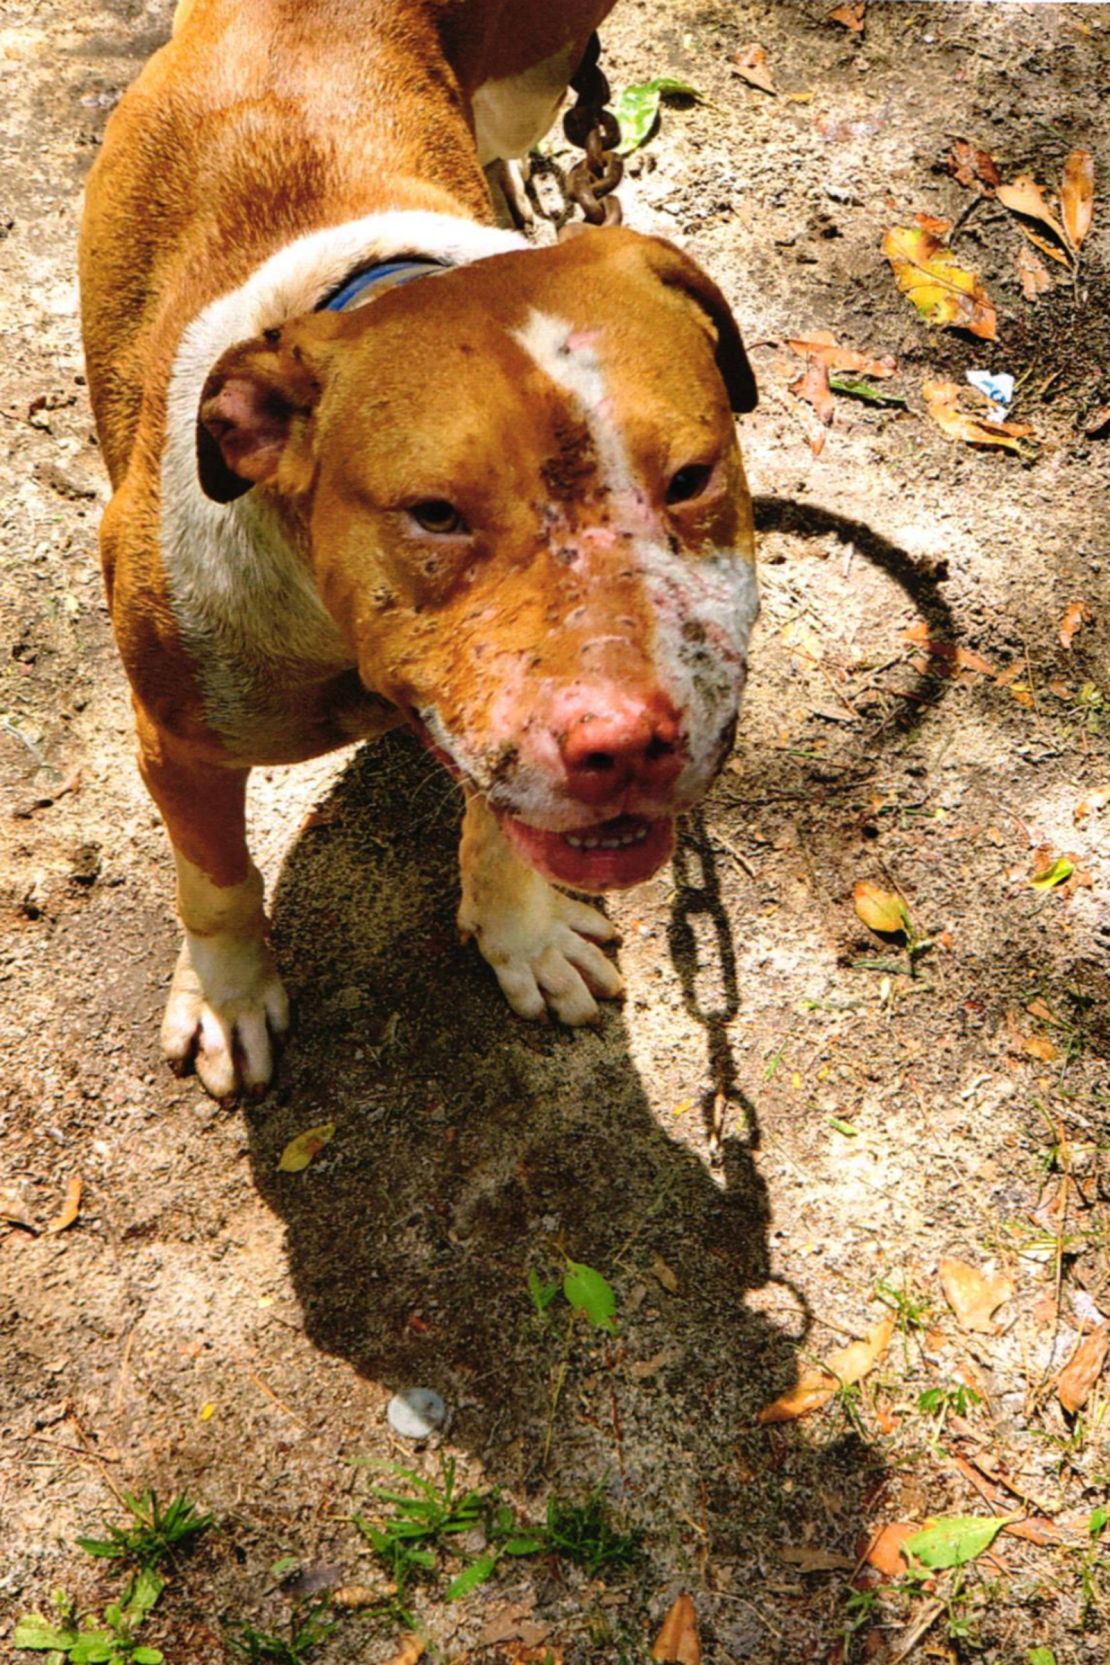 How illegal dog fighting has adapted and continued to thrive in the shadows